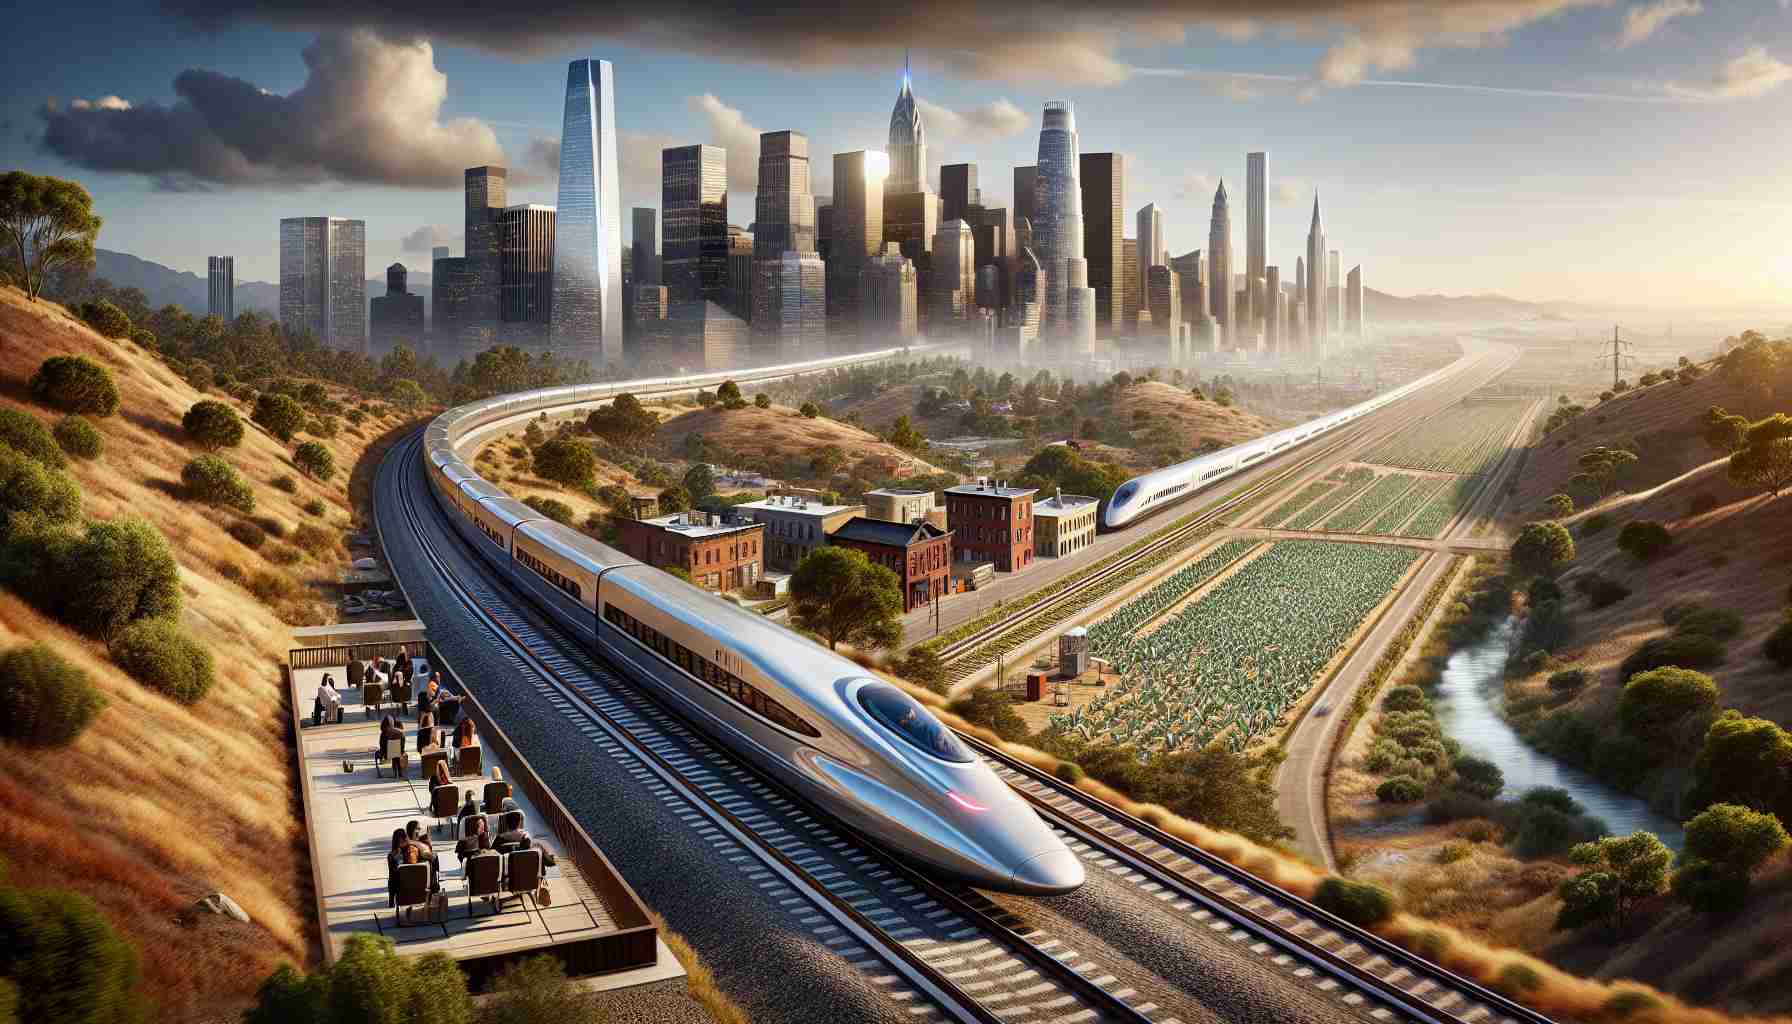 Imagine a high-definition, hyper-realistic image illustrating the future of high-speed rail in the United States. The scene captures a sleek, modern bullet train racing along a cutting-edge rail system set amidst diverse American landscapes. Varying terrains, from urban cityscapes to scenic countryside, unfolds in the background, showcasing the versatility of the ambitious project. The design of the train is sleek and futuristic, embodying the spirit of innovation and progress. Passengers inside the train are diverse, including women and men of different descents like Caucasian, Black, Hispanic, and Asian.